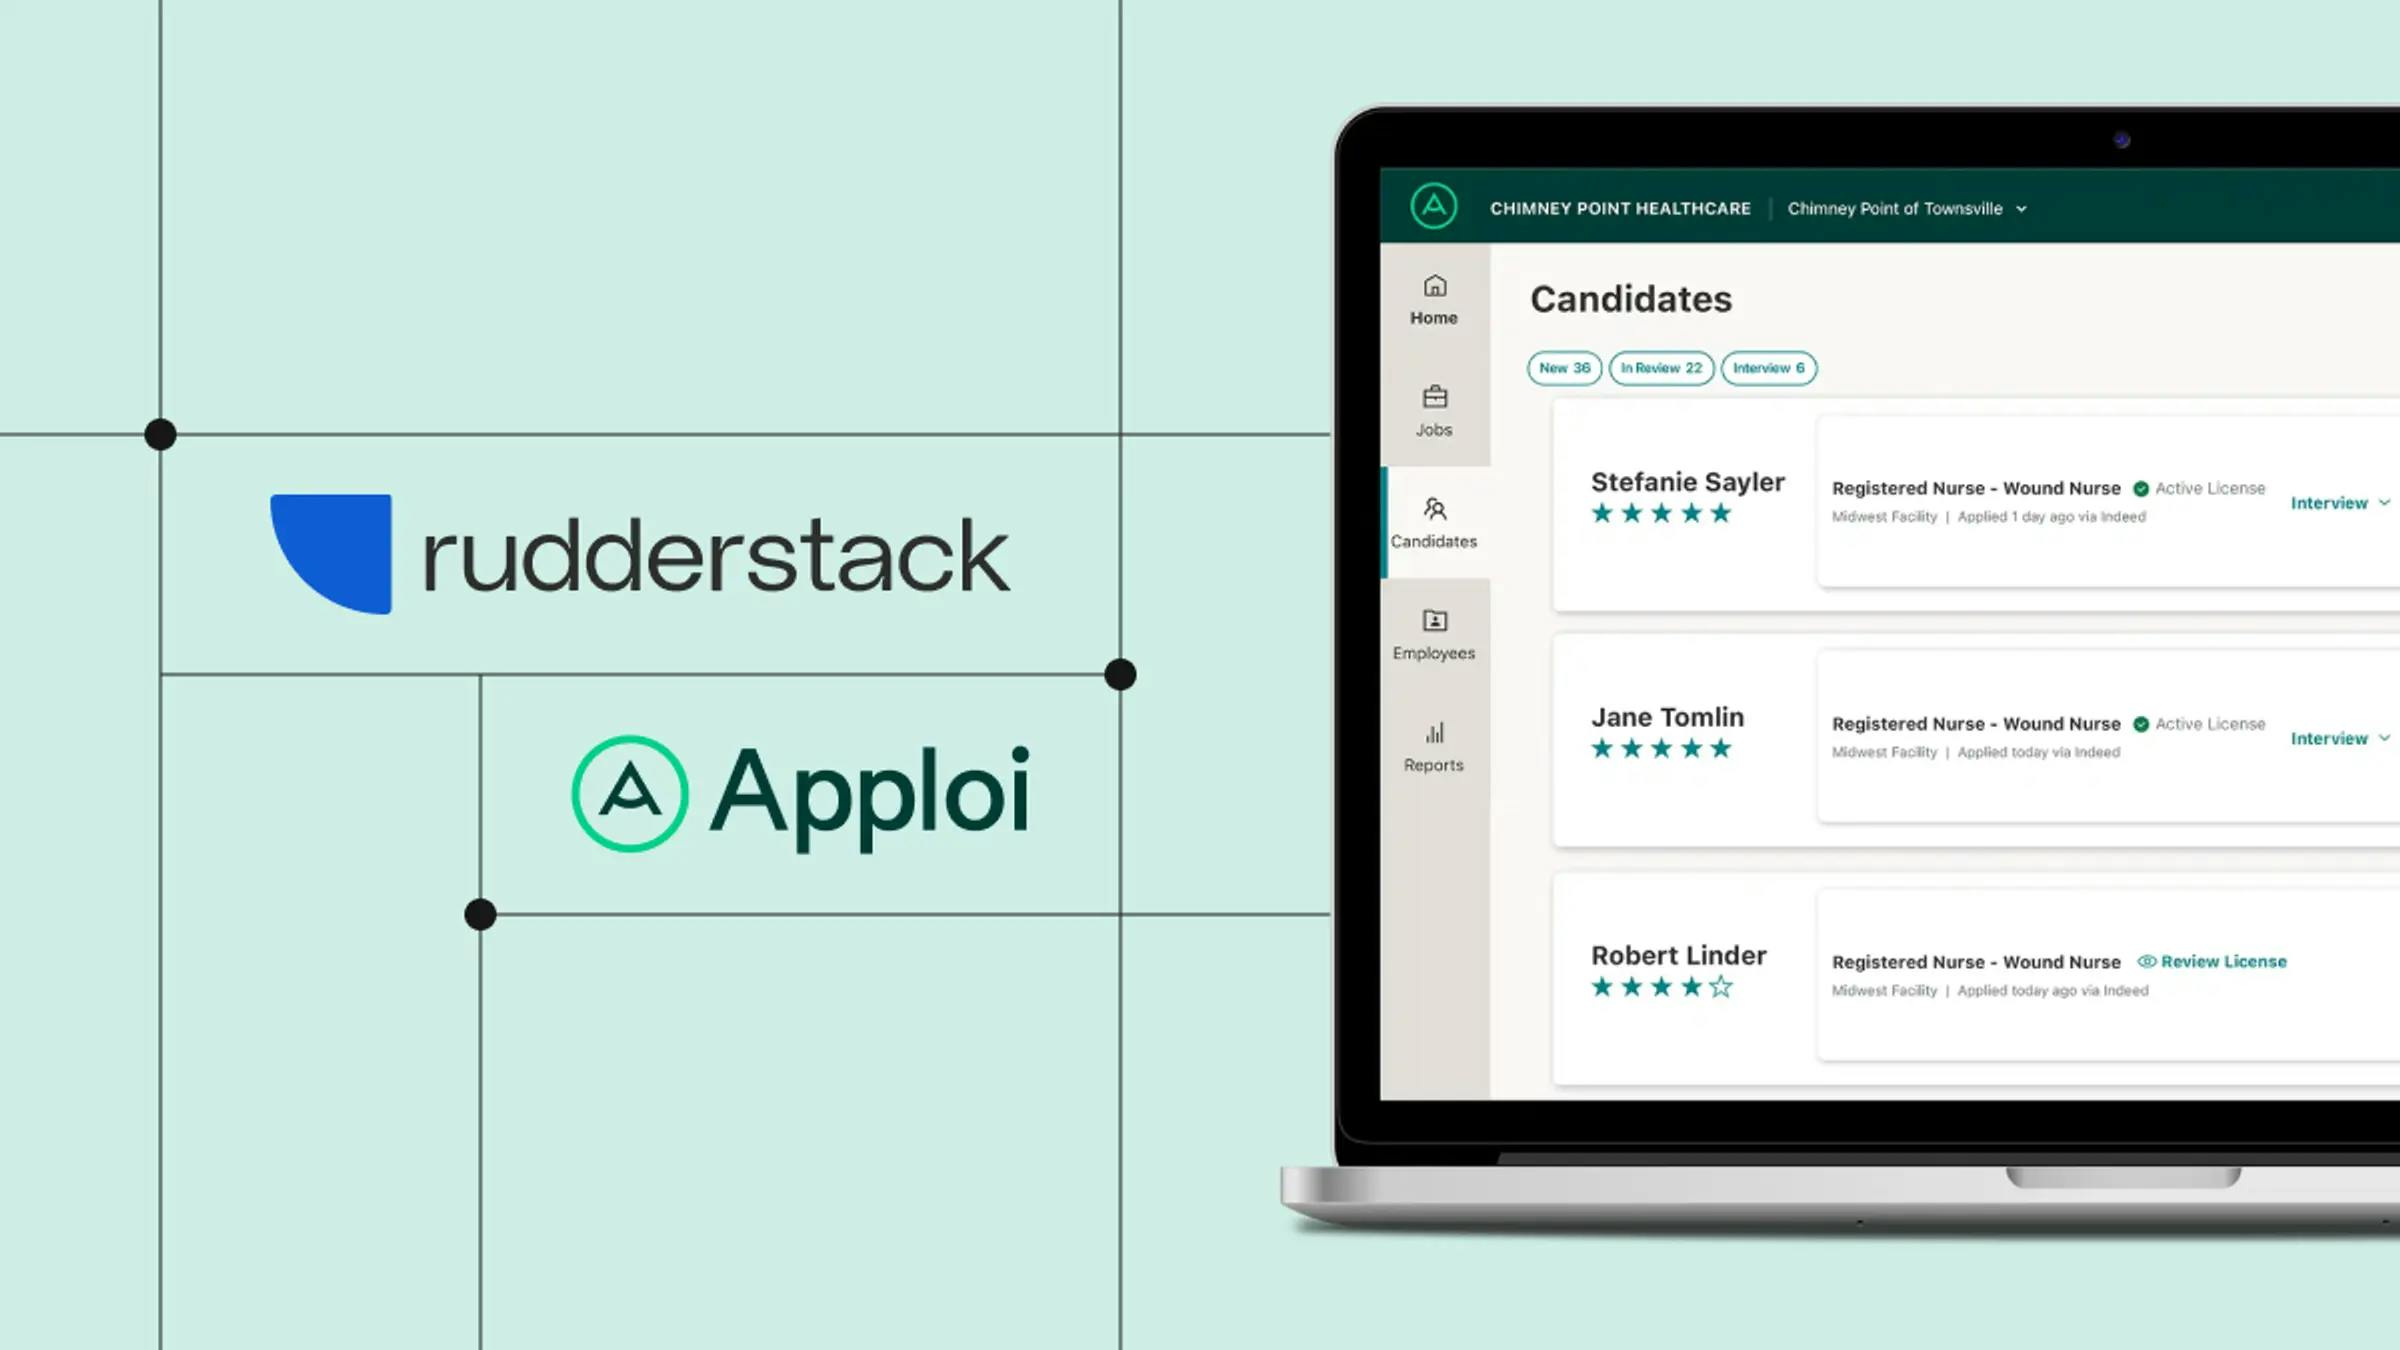 Apploi reduces costs and builds a solid data foundation by switching to RudderStack